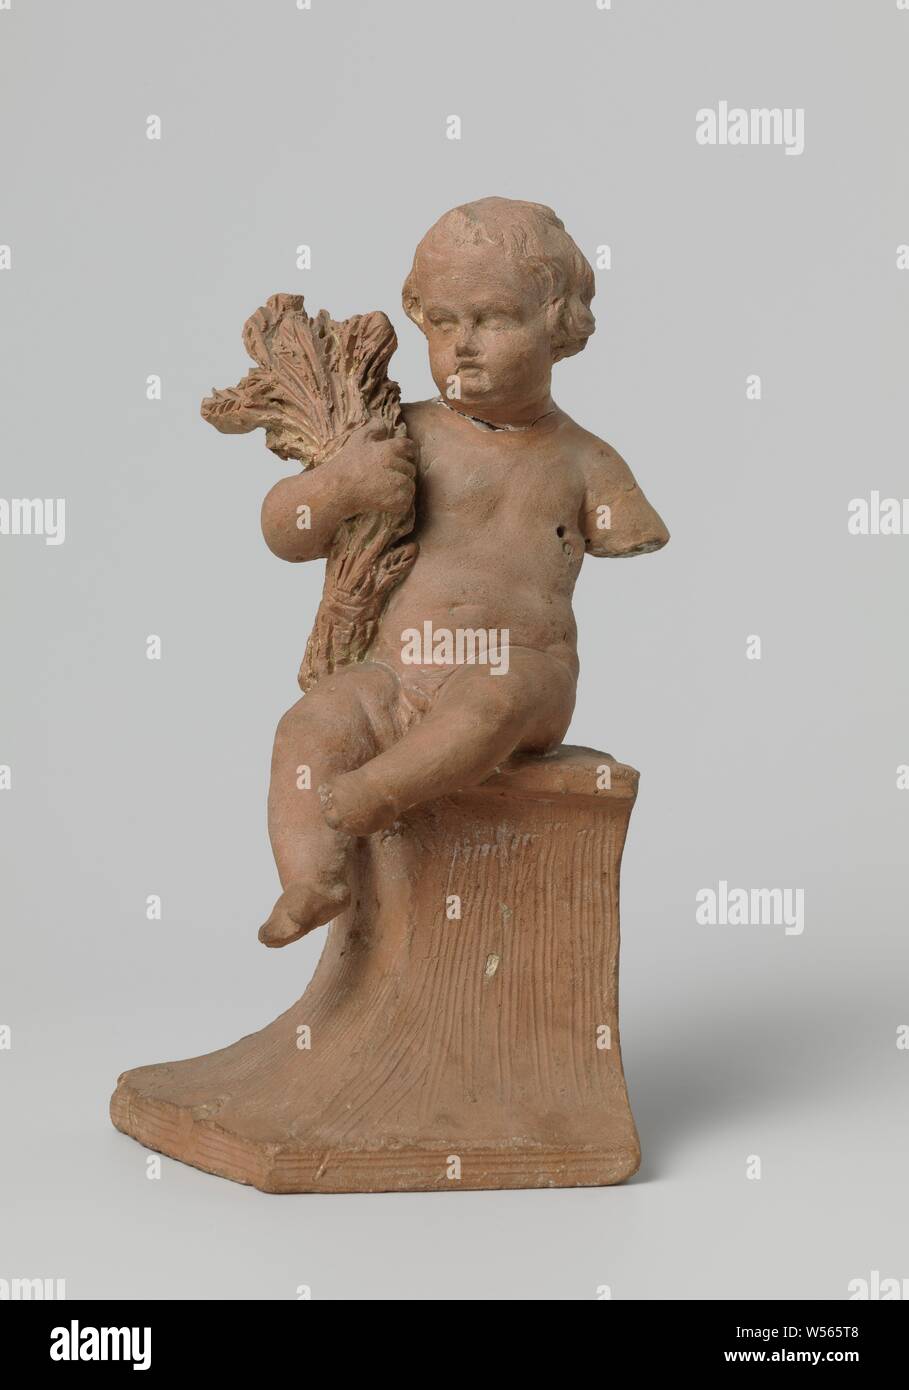 Season, presented by child with attribute, Northern Netherlands, 1725 - 1740, terracotta (clay material), h 19 cm × w 11 cm × d 8 cm Stock Photo